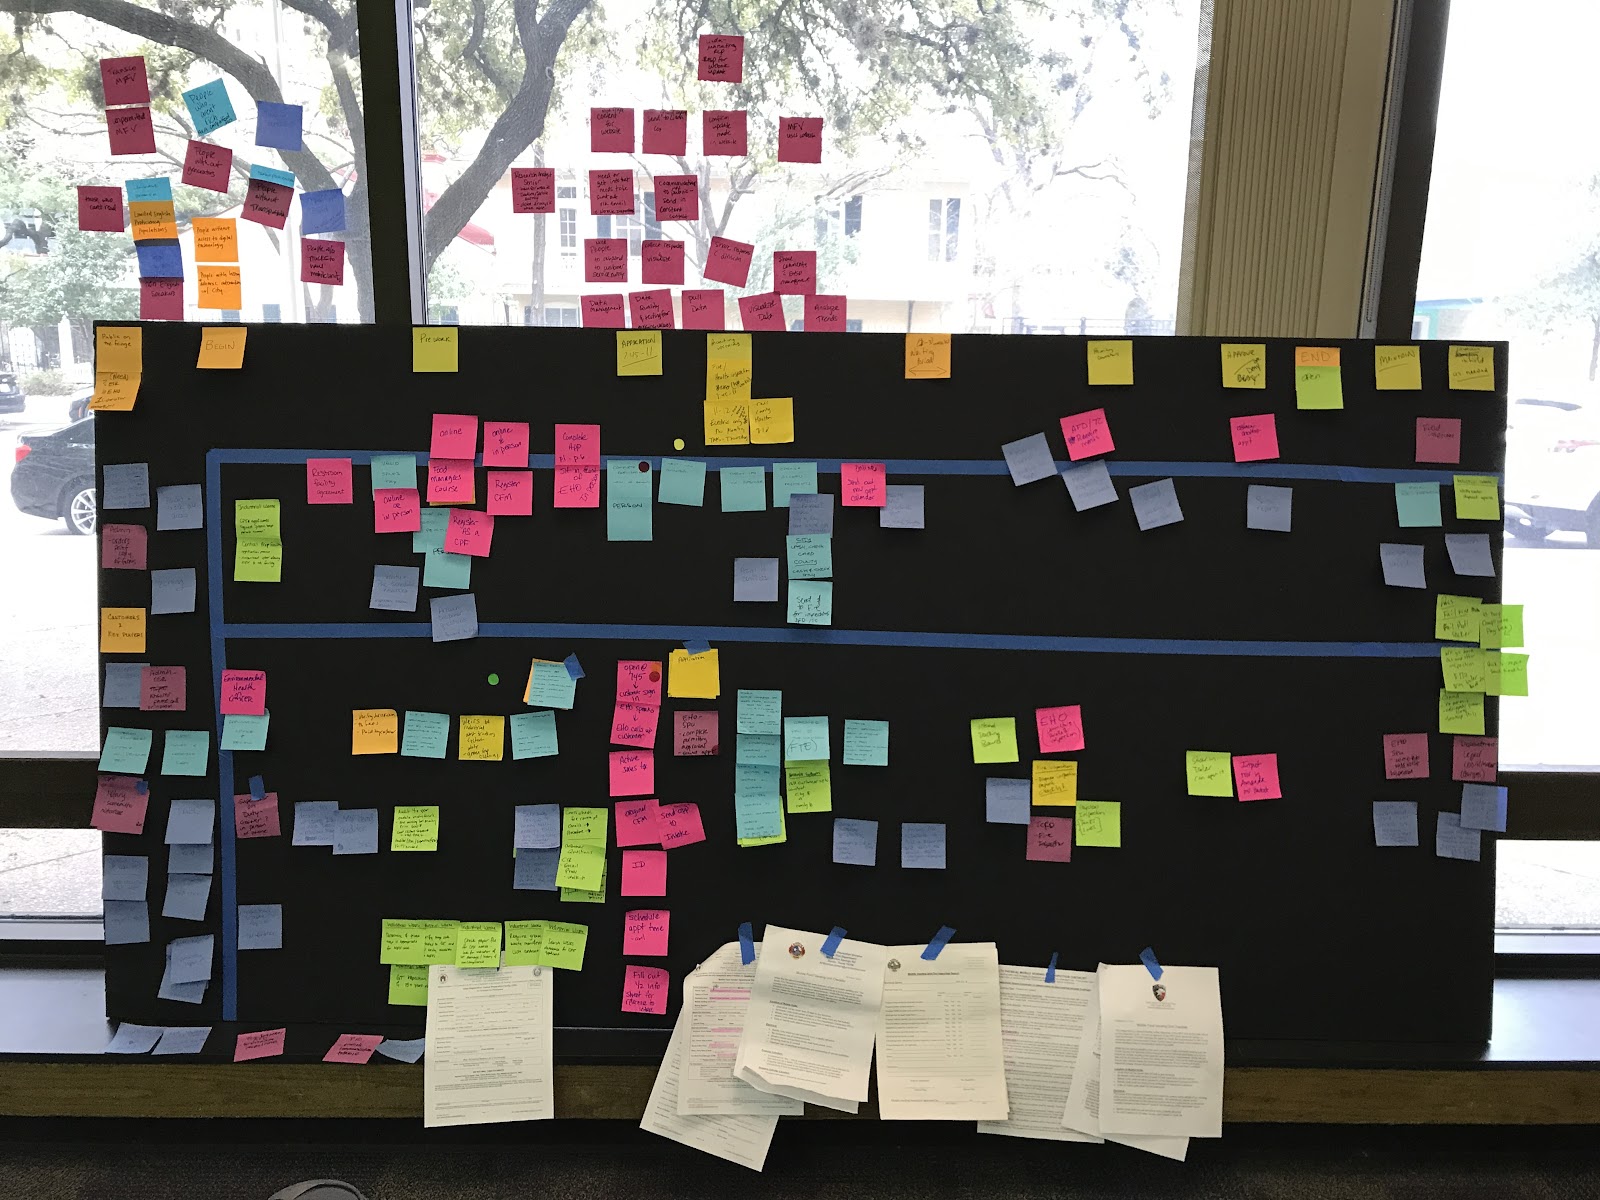 A photo of the draft food truck permit service blueprint Austin Public Health and Service Design Lab staff made together by the end of a workshop, featuring lots of multicolored sticky notes on a black board and backlit windows.